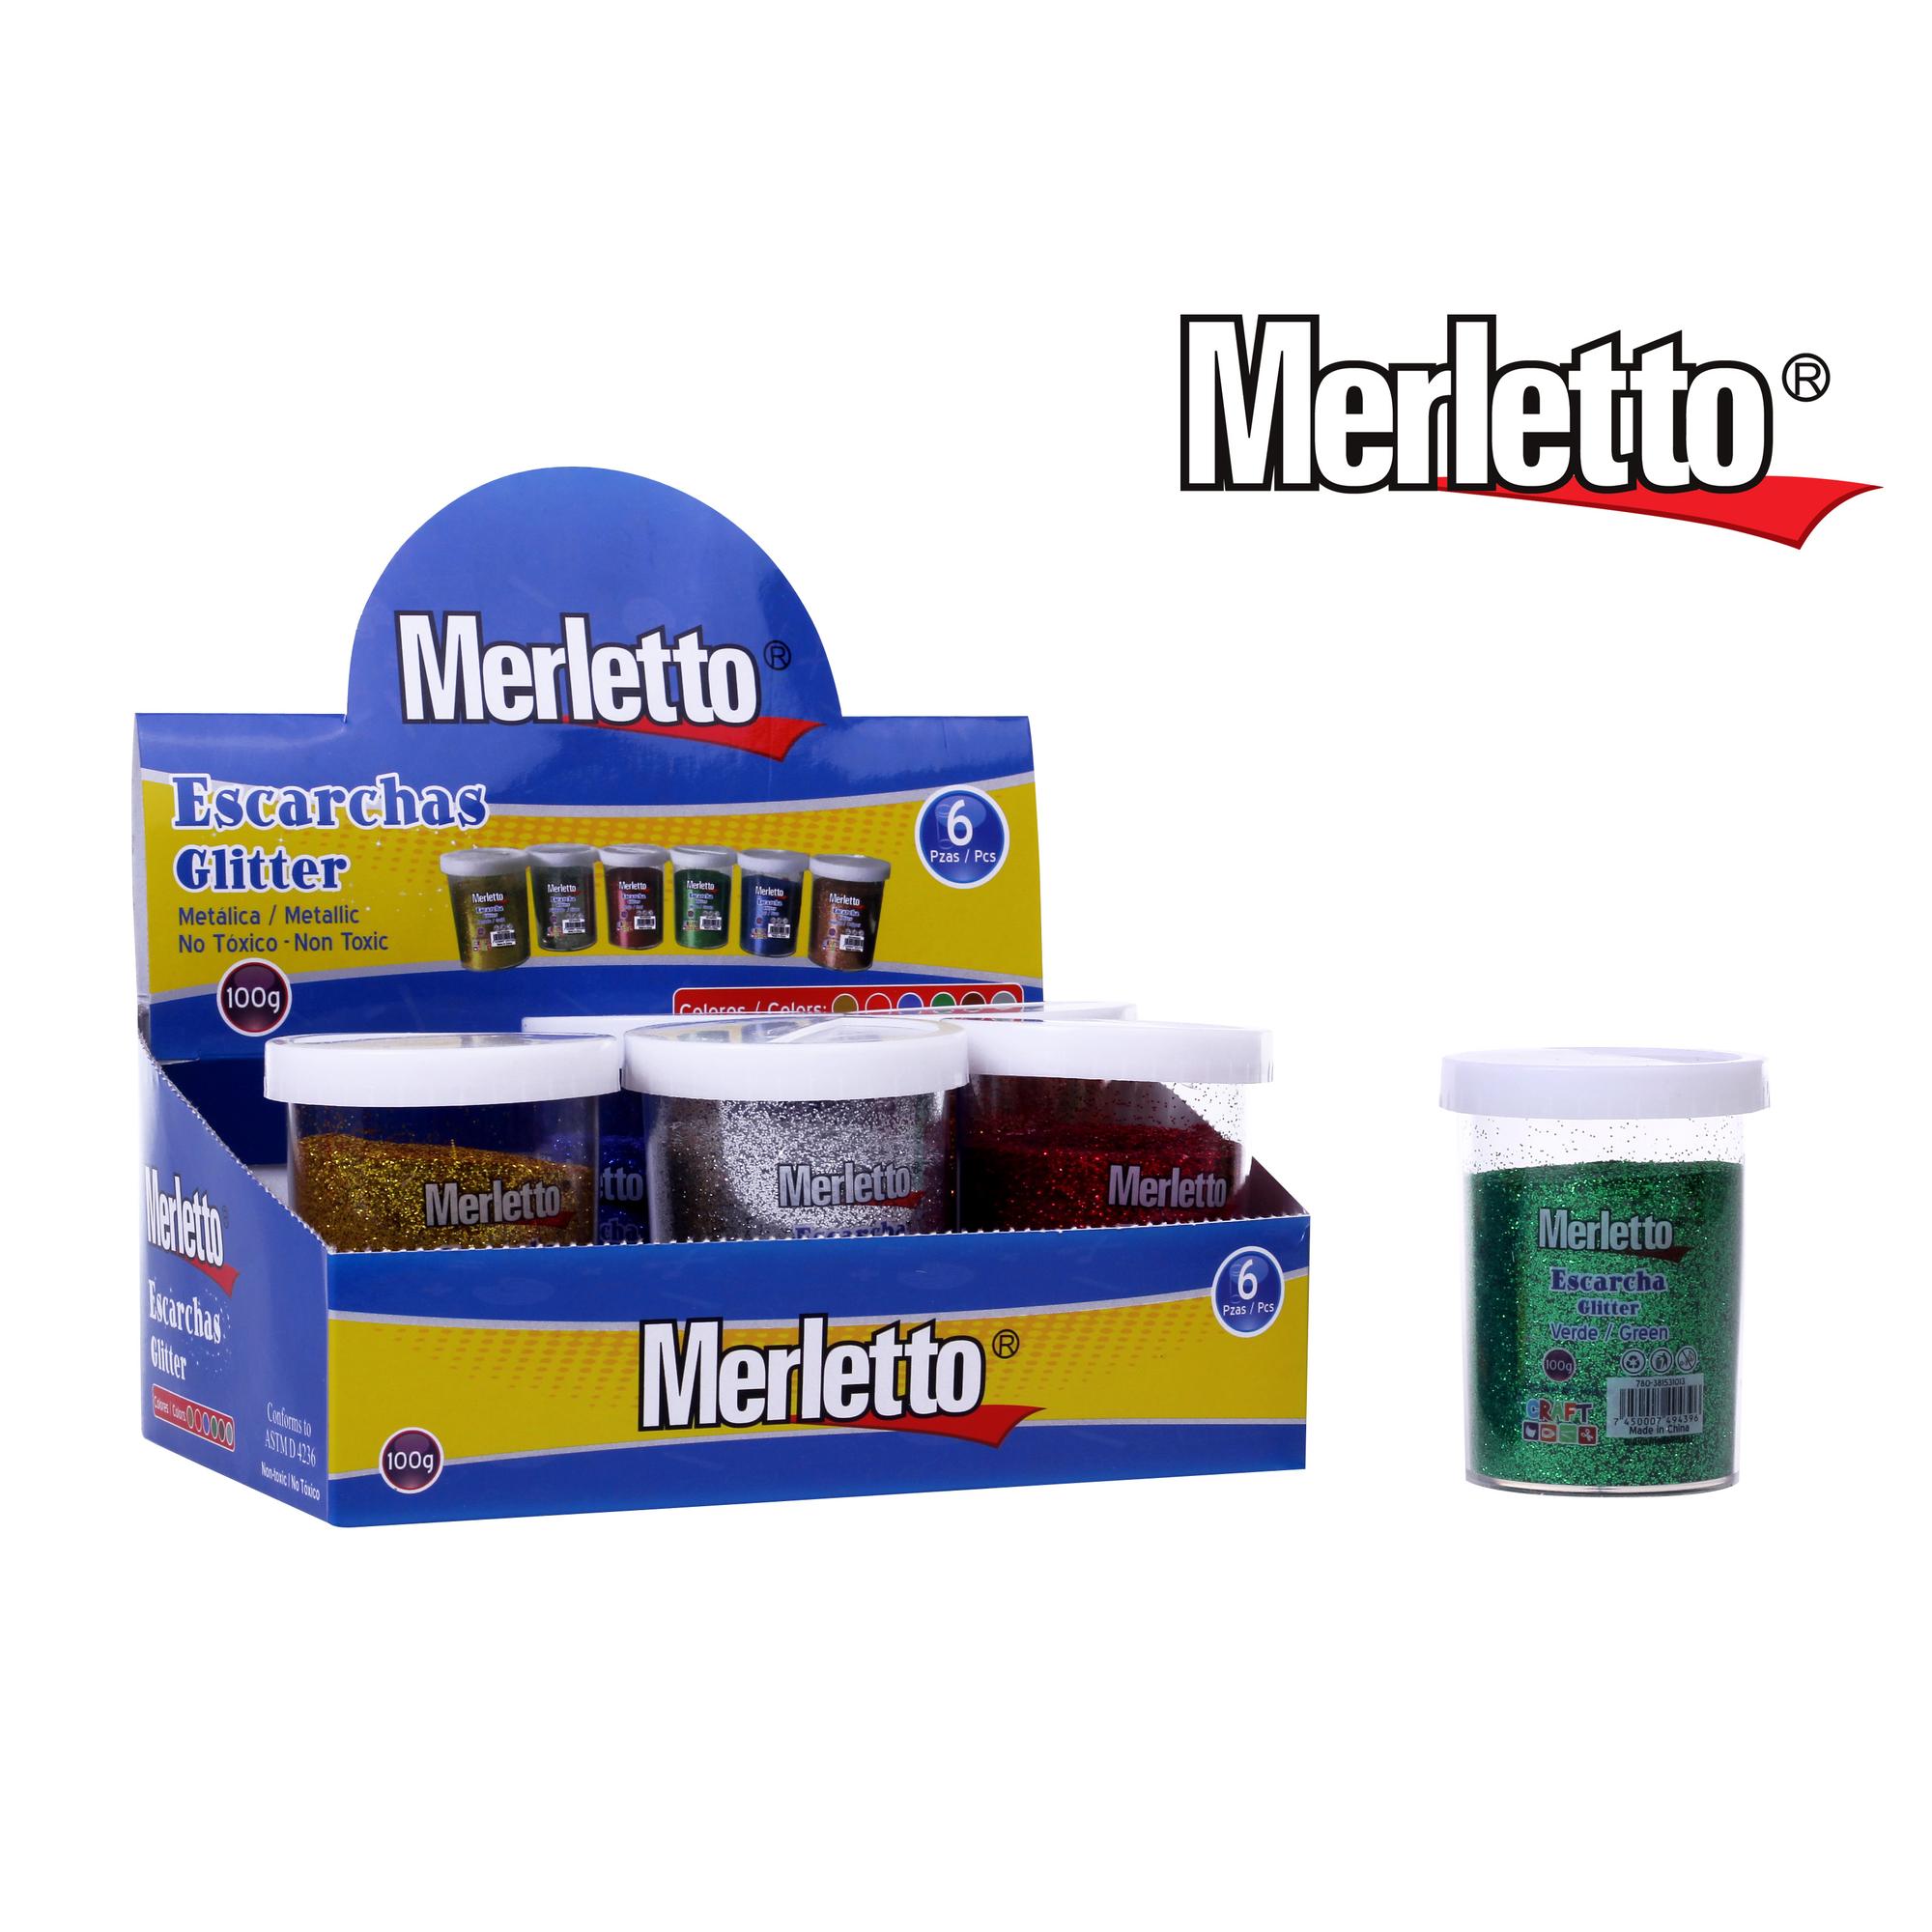 GLITTER METÁLICO 6 CORES 100g - 780-381531001